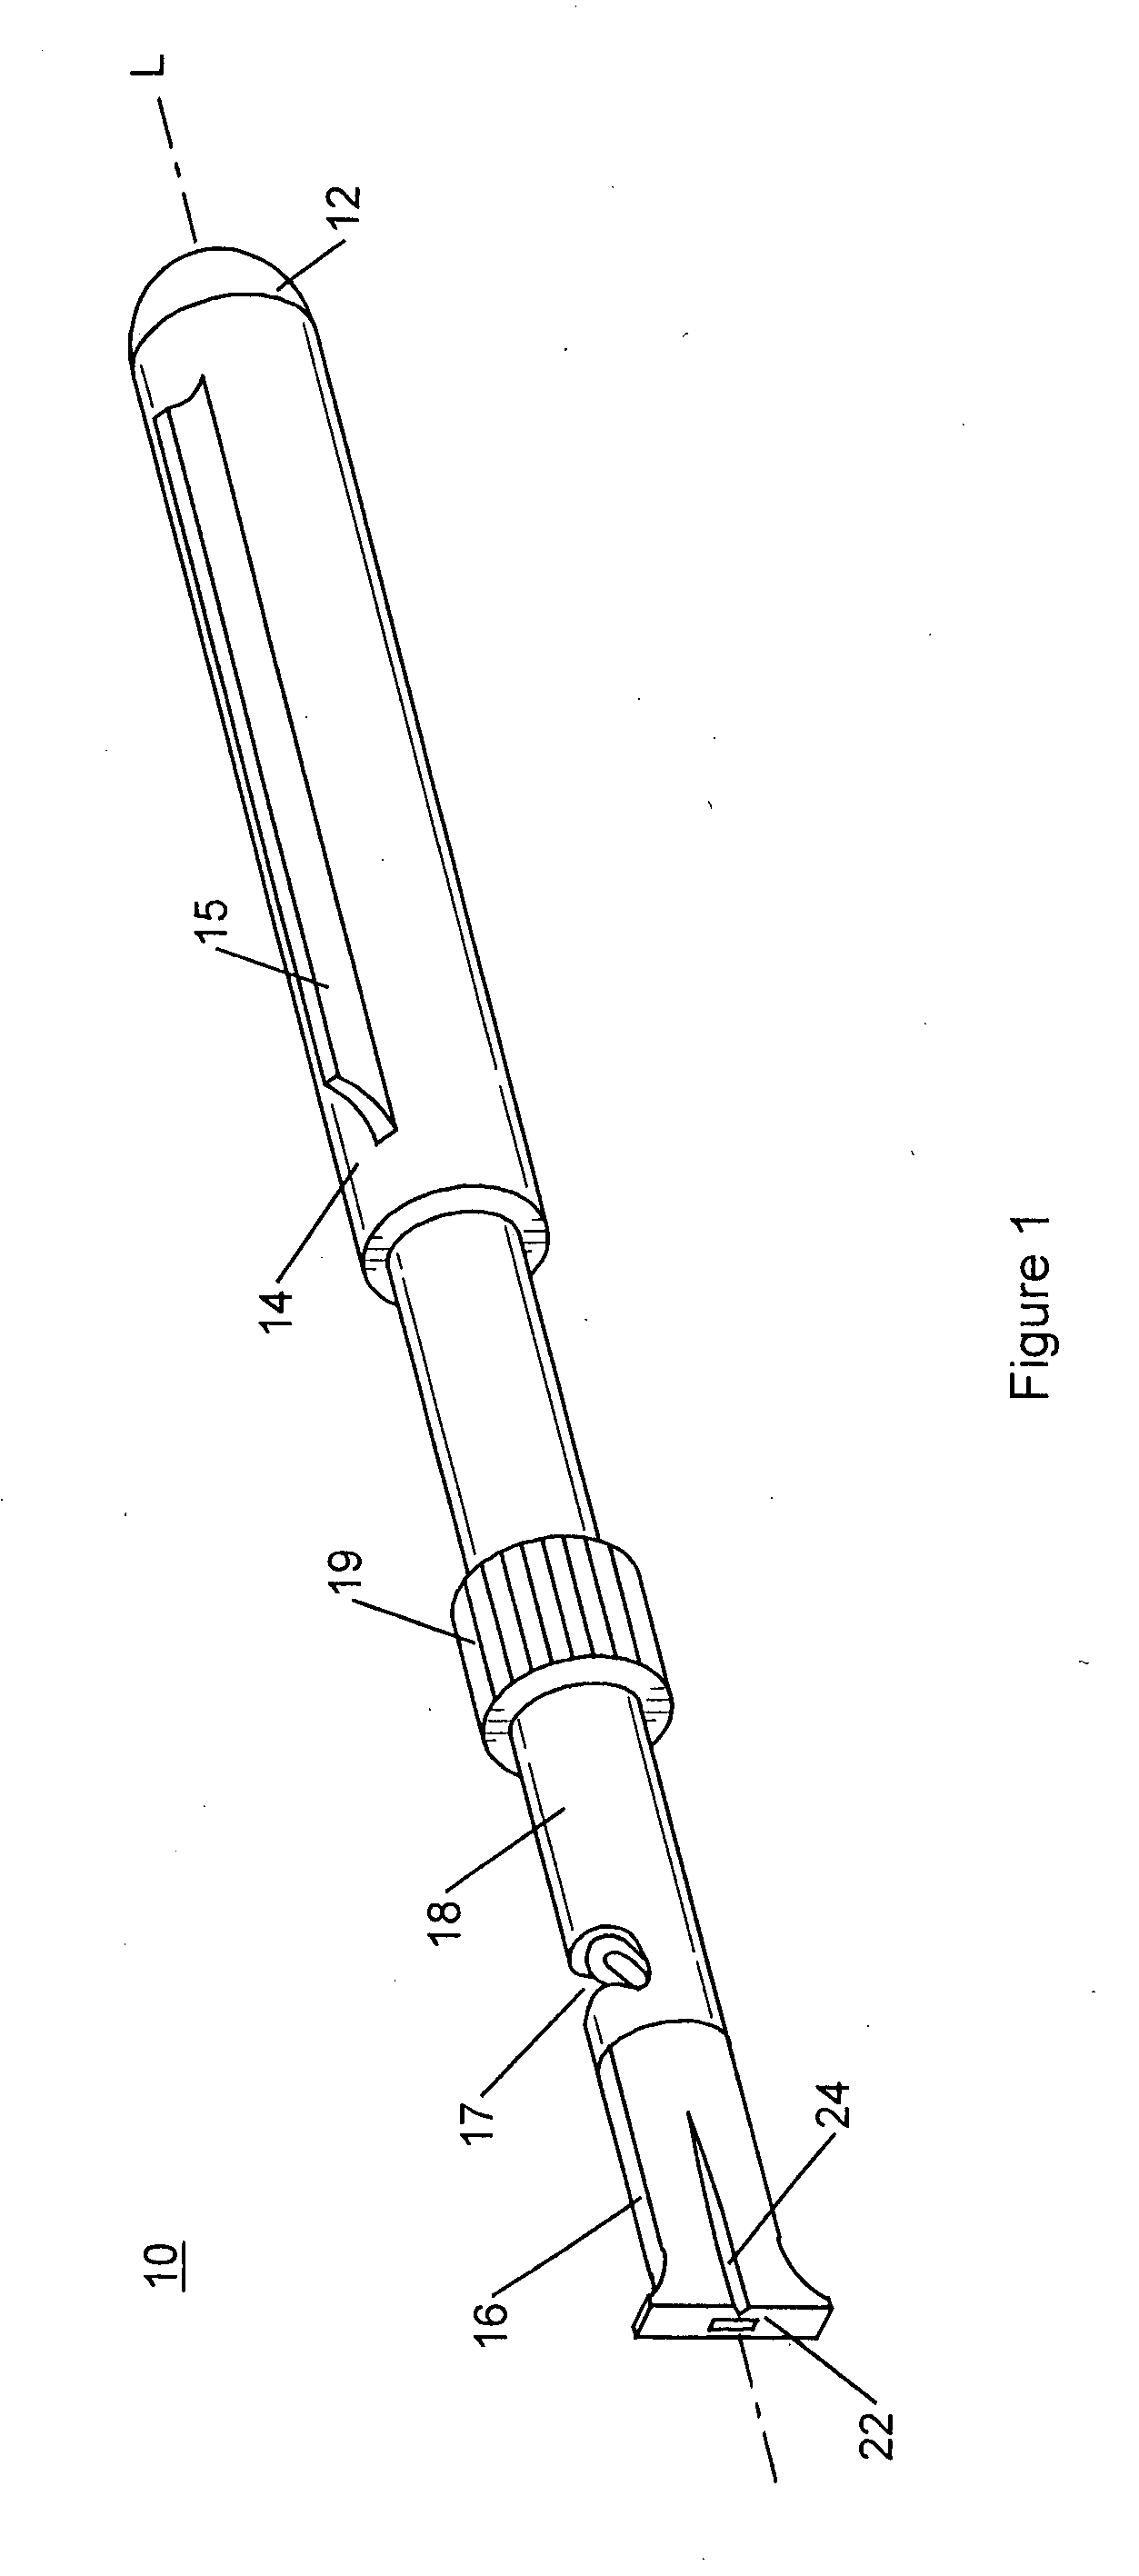 Surgical instrument assembly